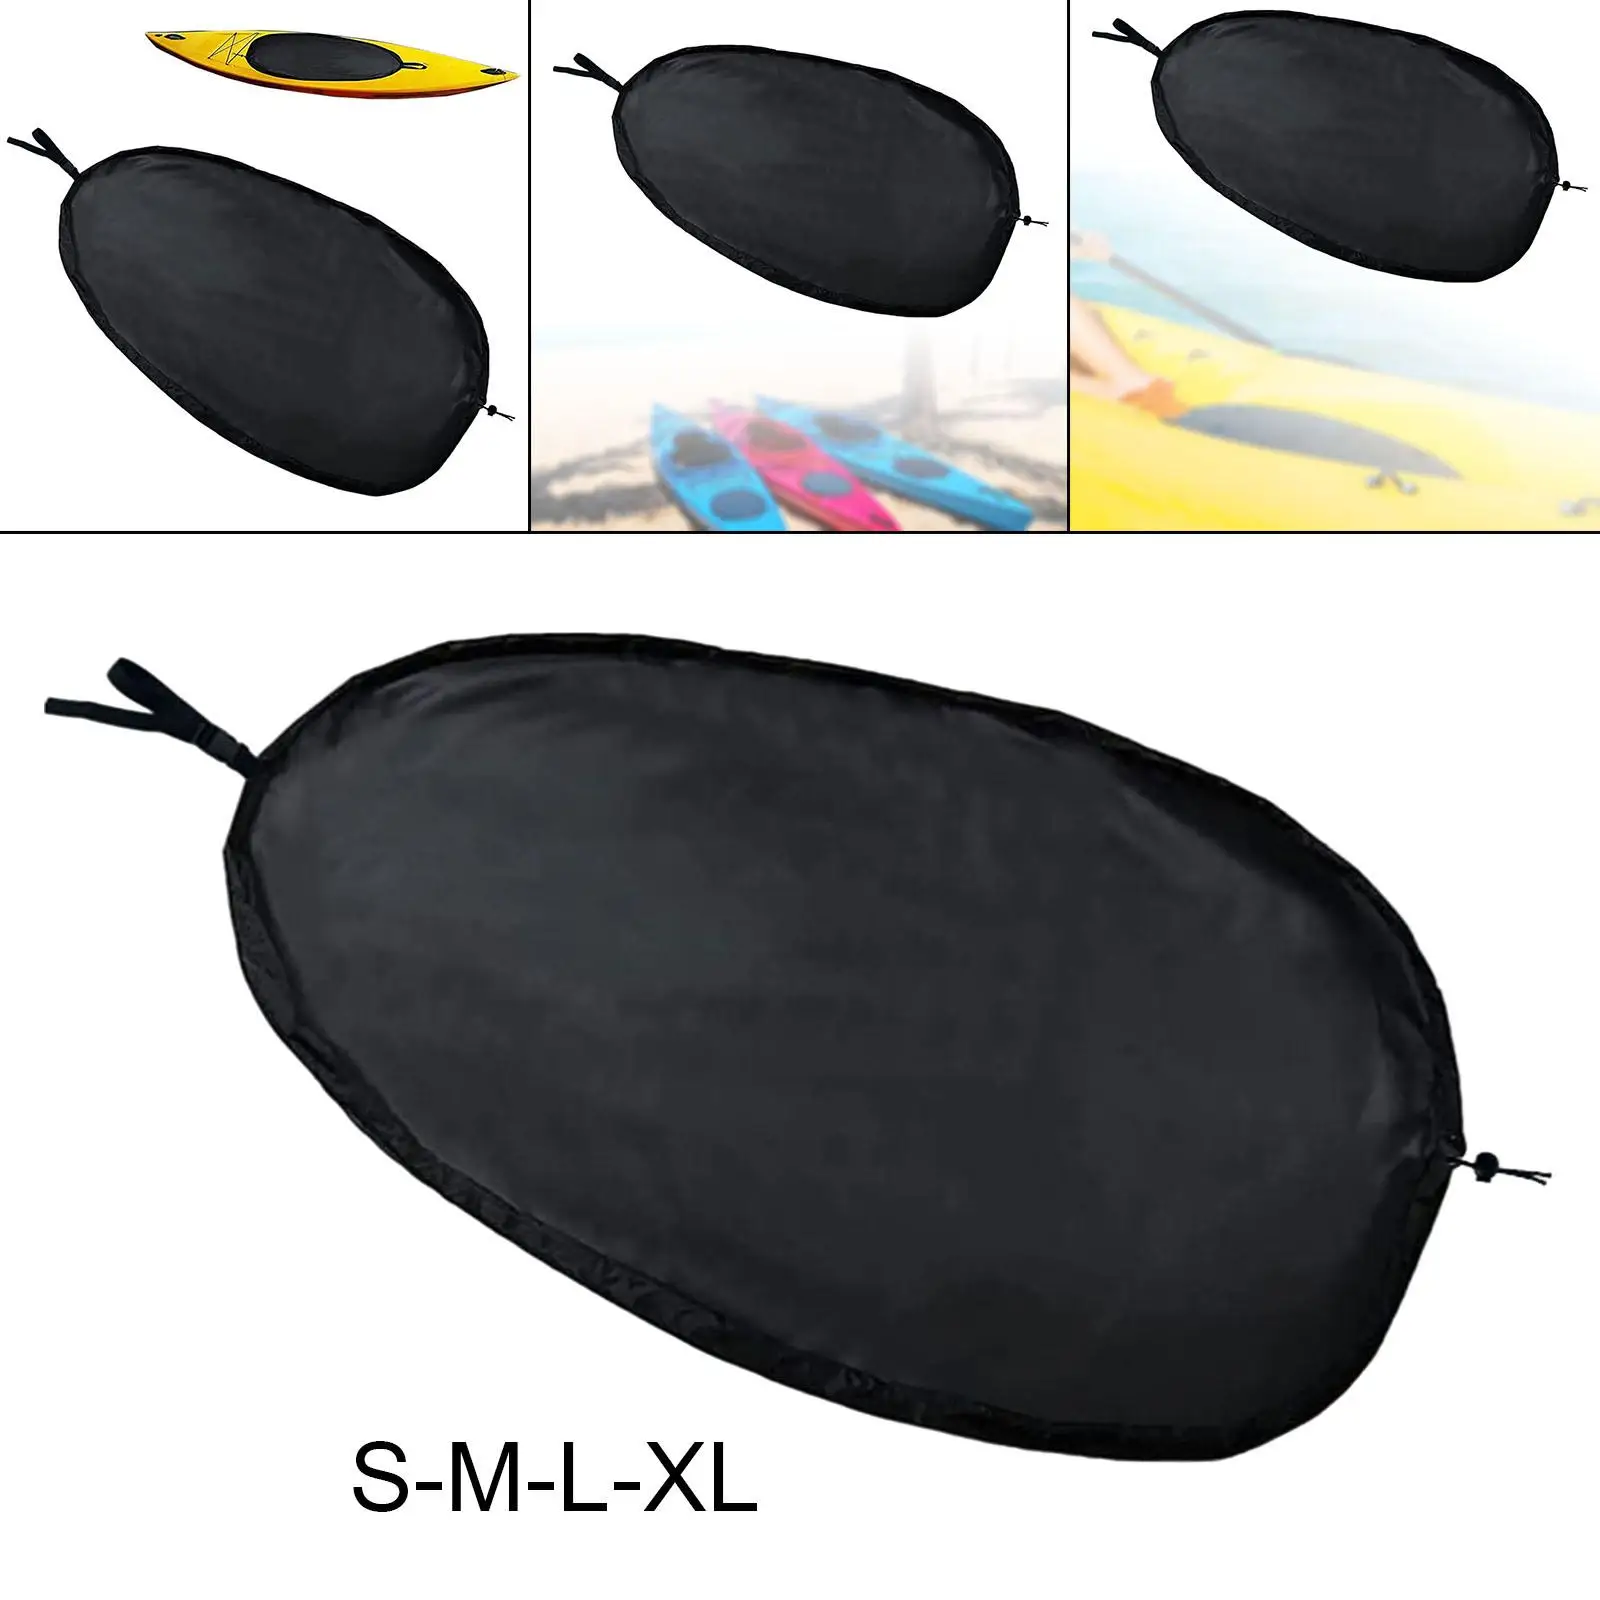 Portable Kayak Cockpit Cover Water Resistance Durable Breathable for Canoe